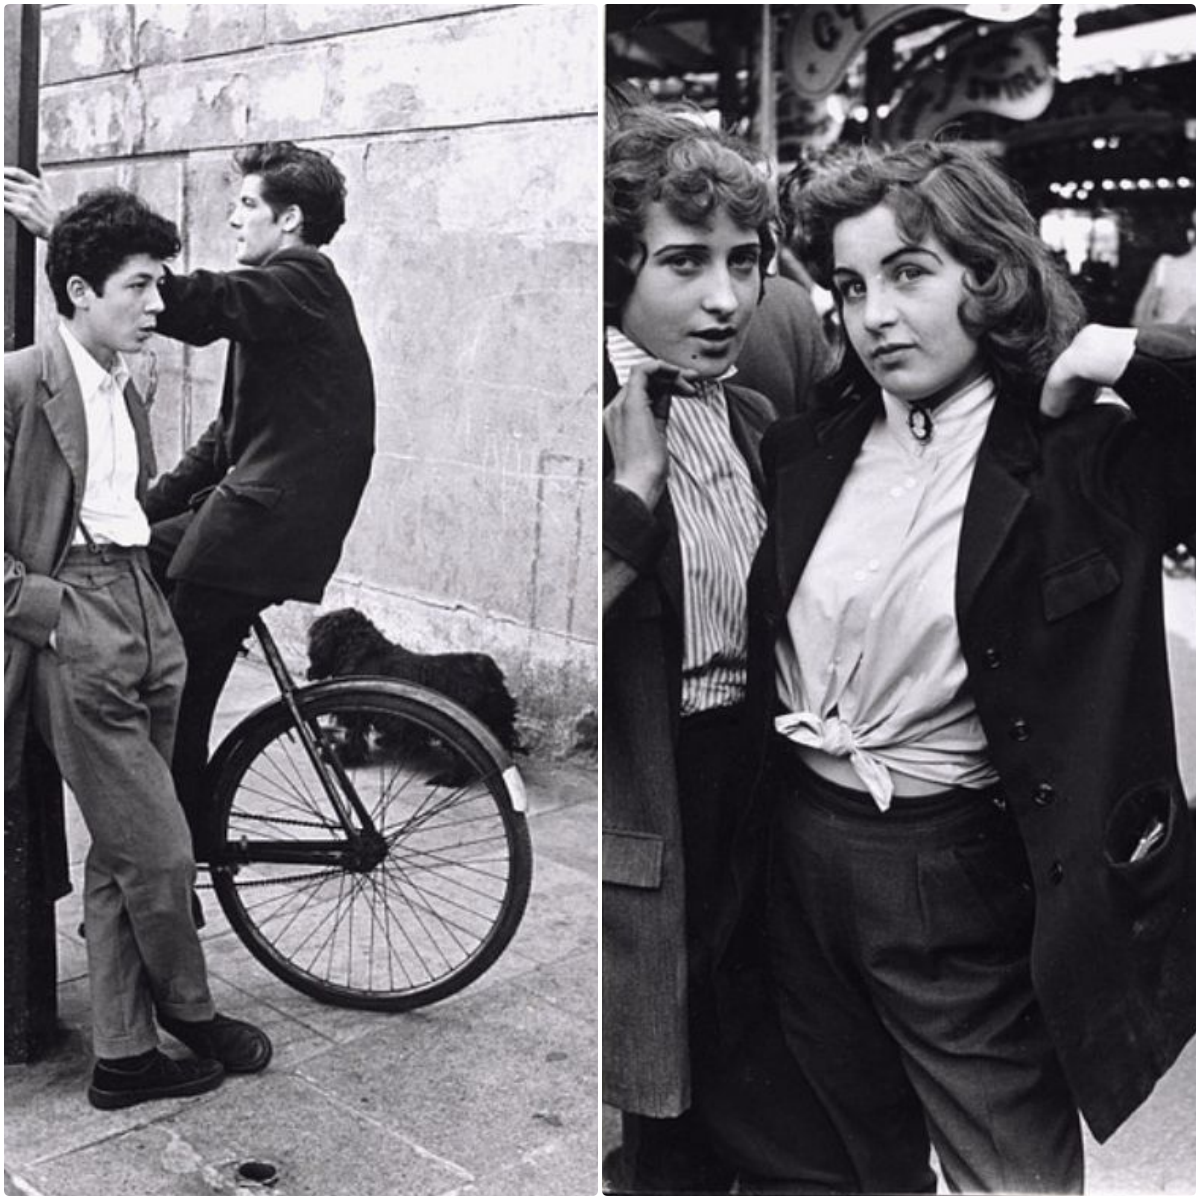 27 Fascinating Black and White Photographs That Capture Scenes of London Youth Culture in the Late 1950s and Early 1960s